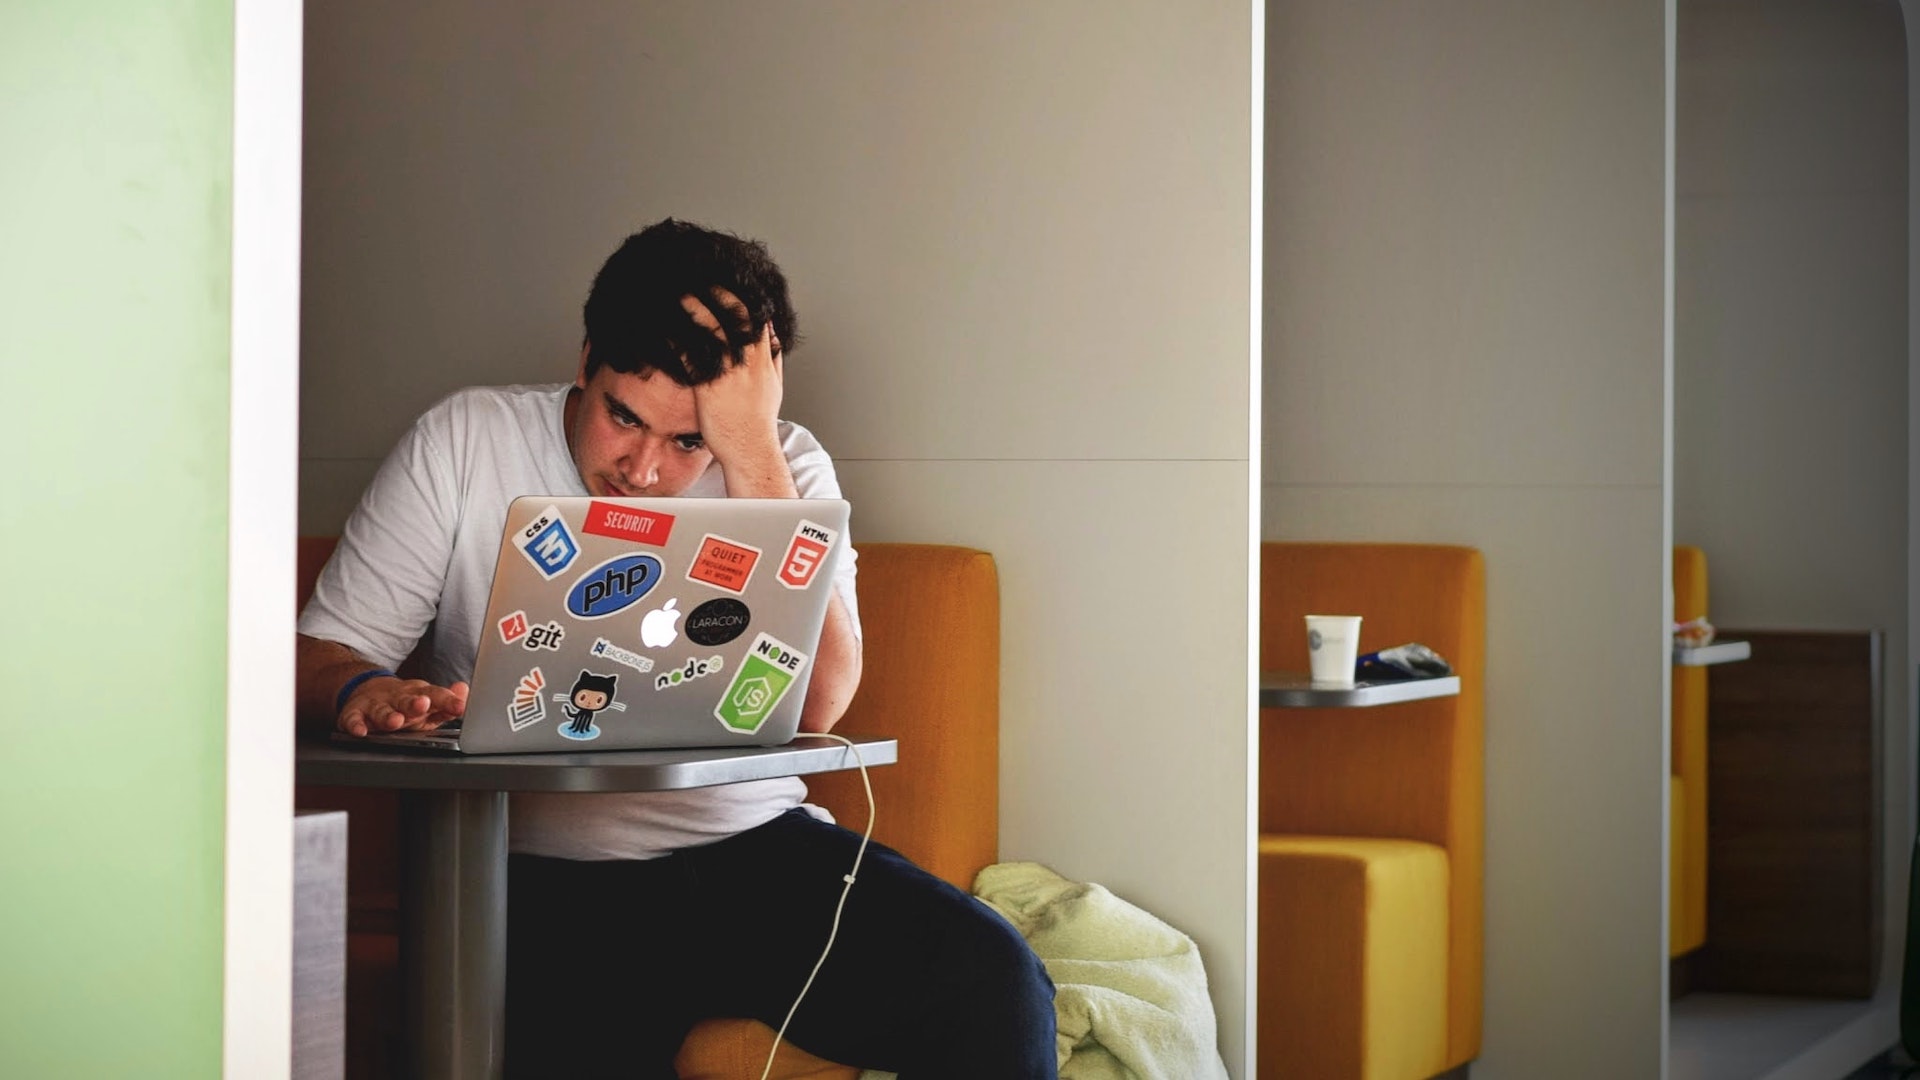 A stressed person sits in a booth at a tech company with a laptop open before him.